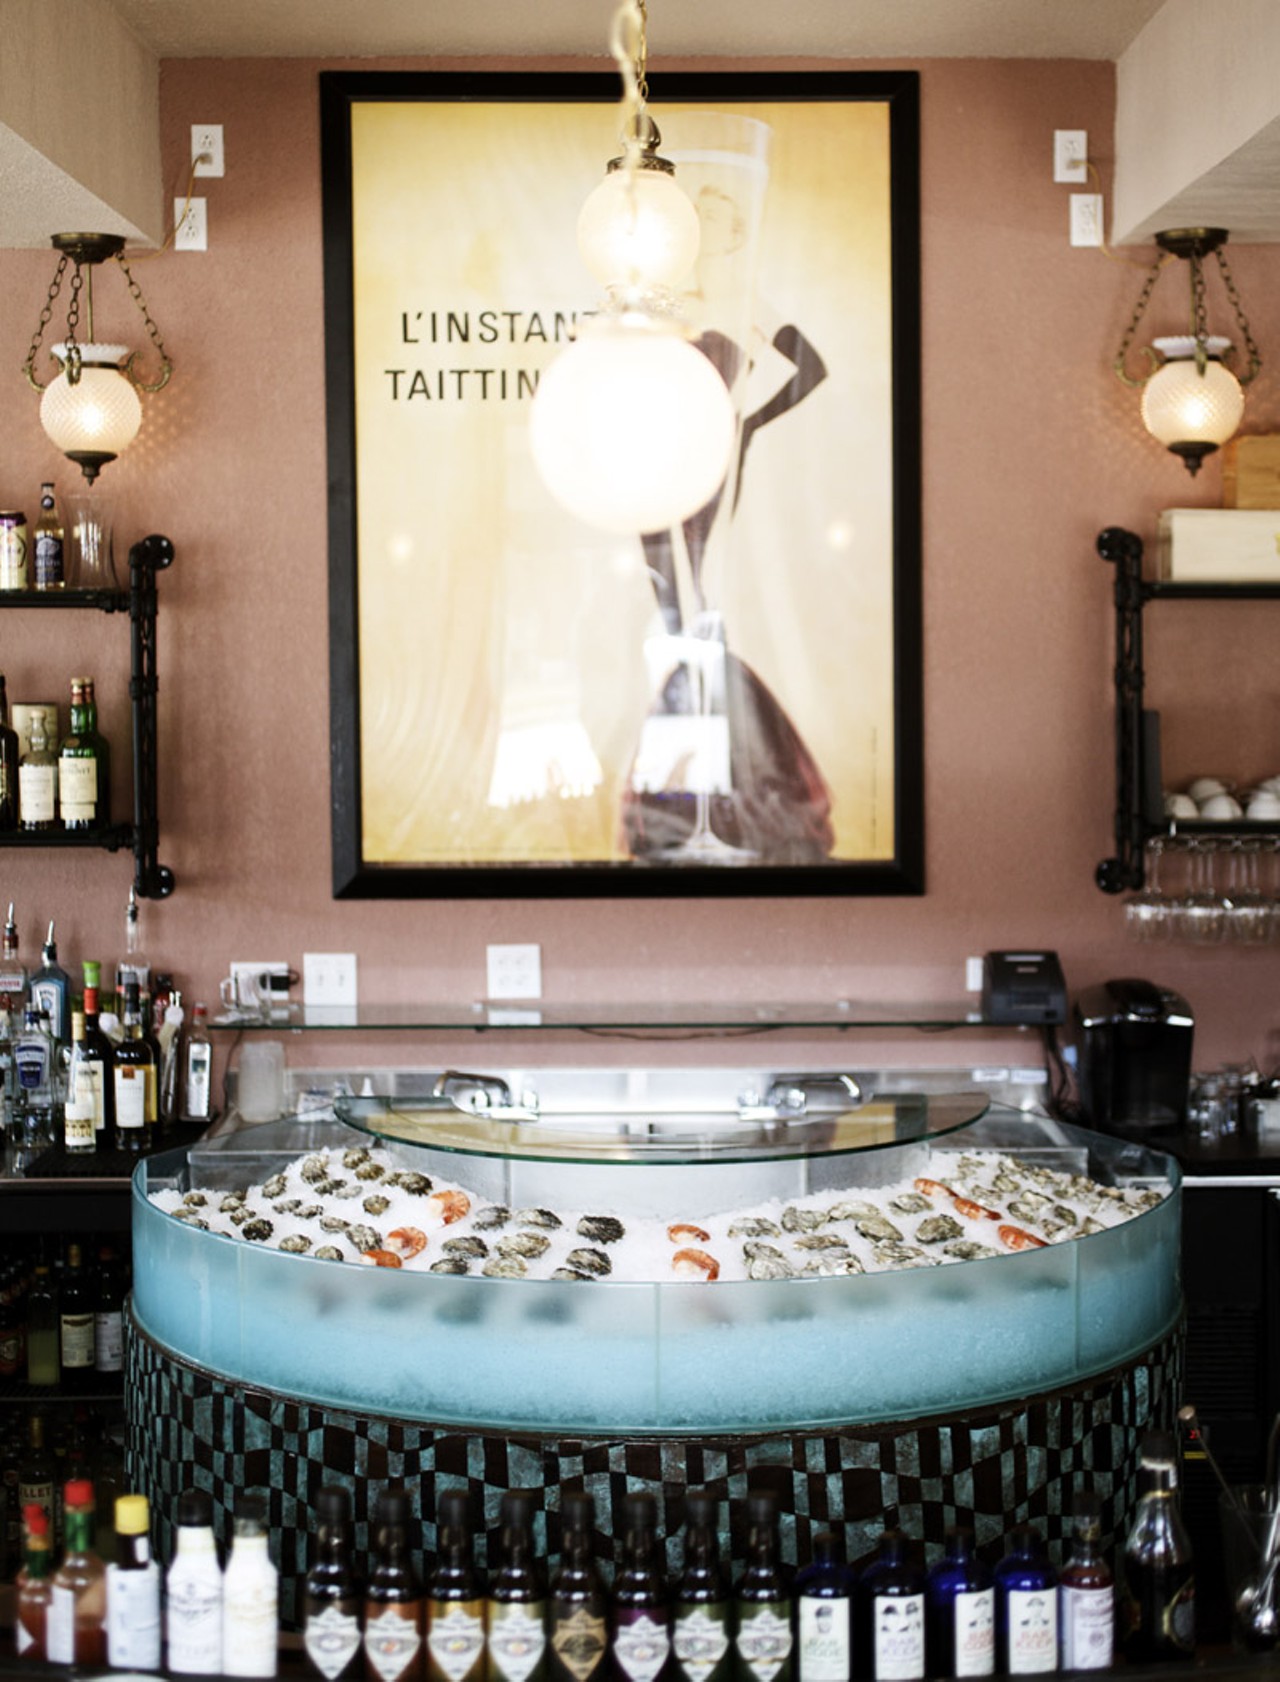 The oyster bar/ shucking station.